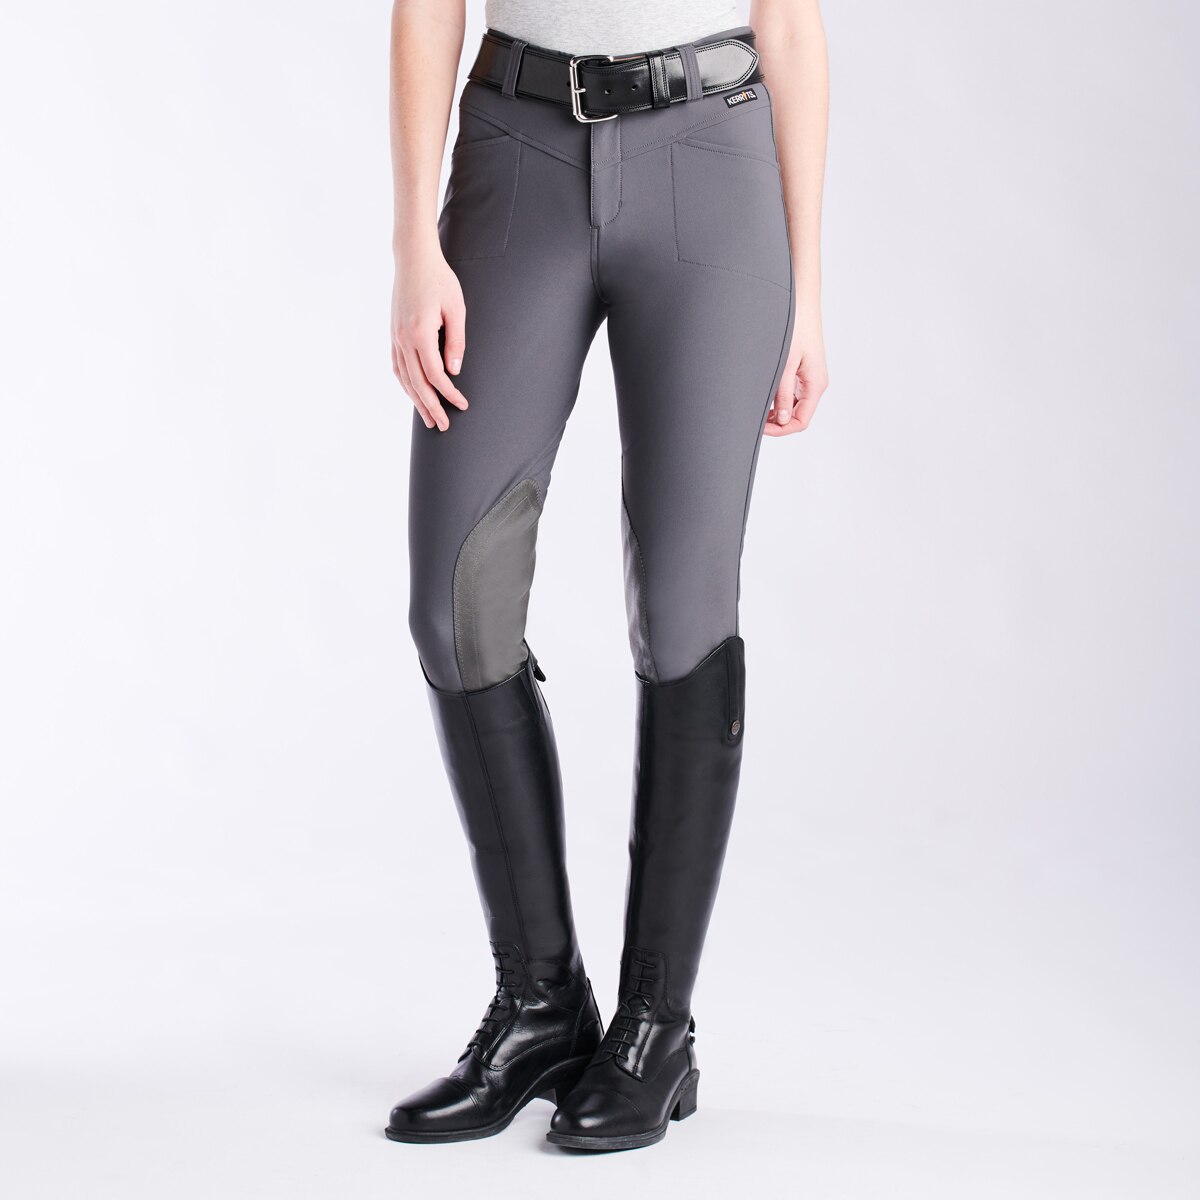 Kerrits Cross-Over Breech Knee Patch Riding Breeches Dynamic Extreme Fabric 